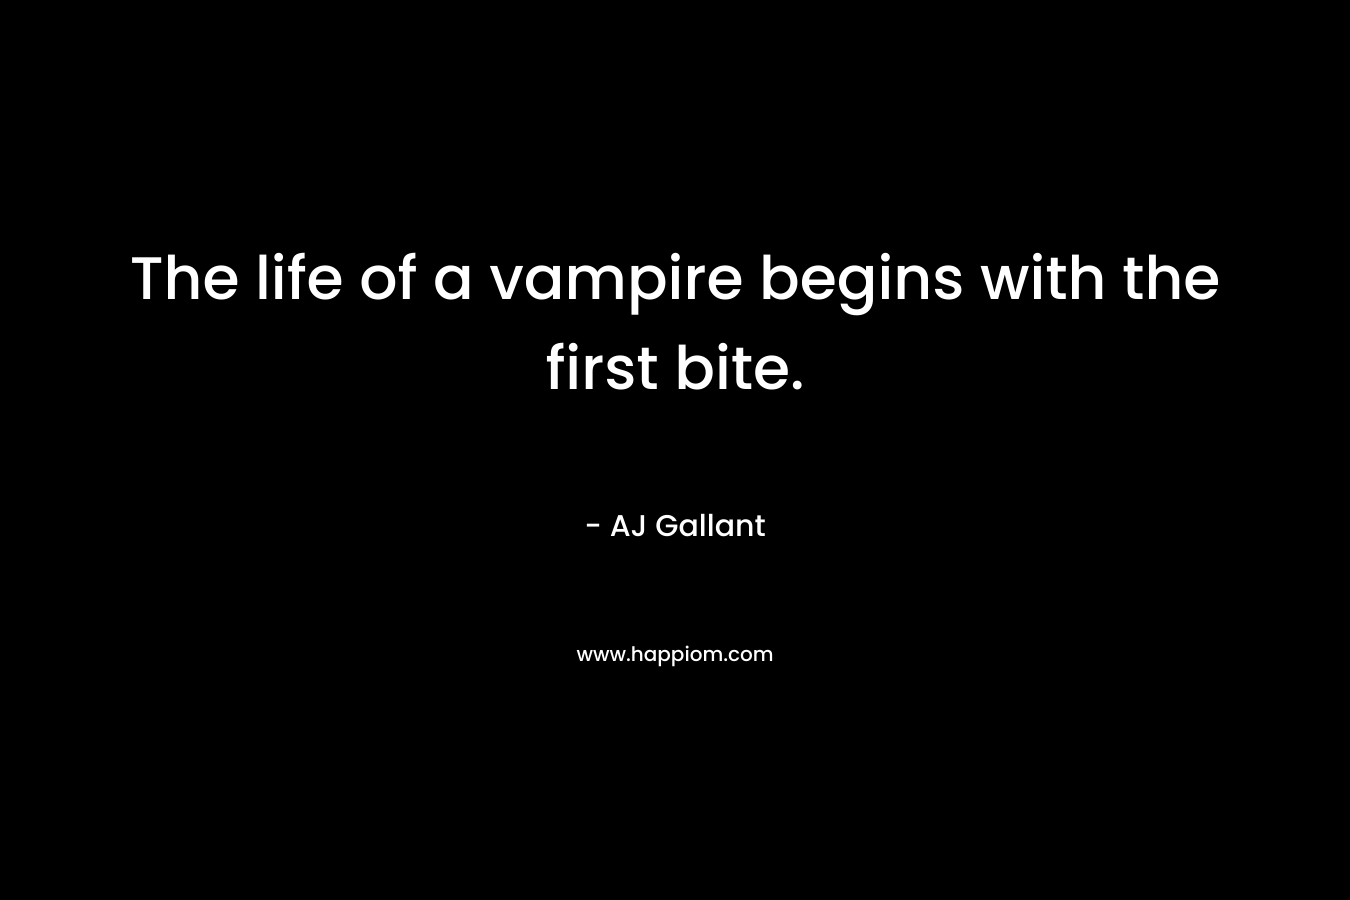 The life of a vampire begins with the first bite.